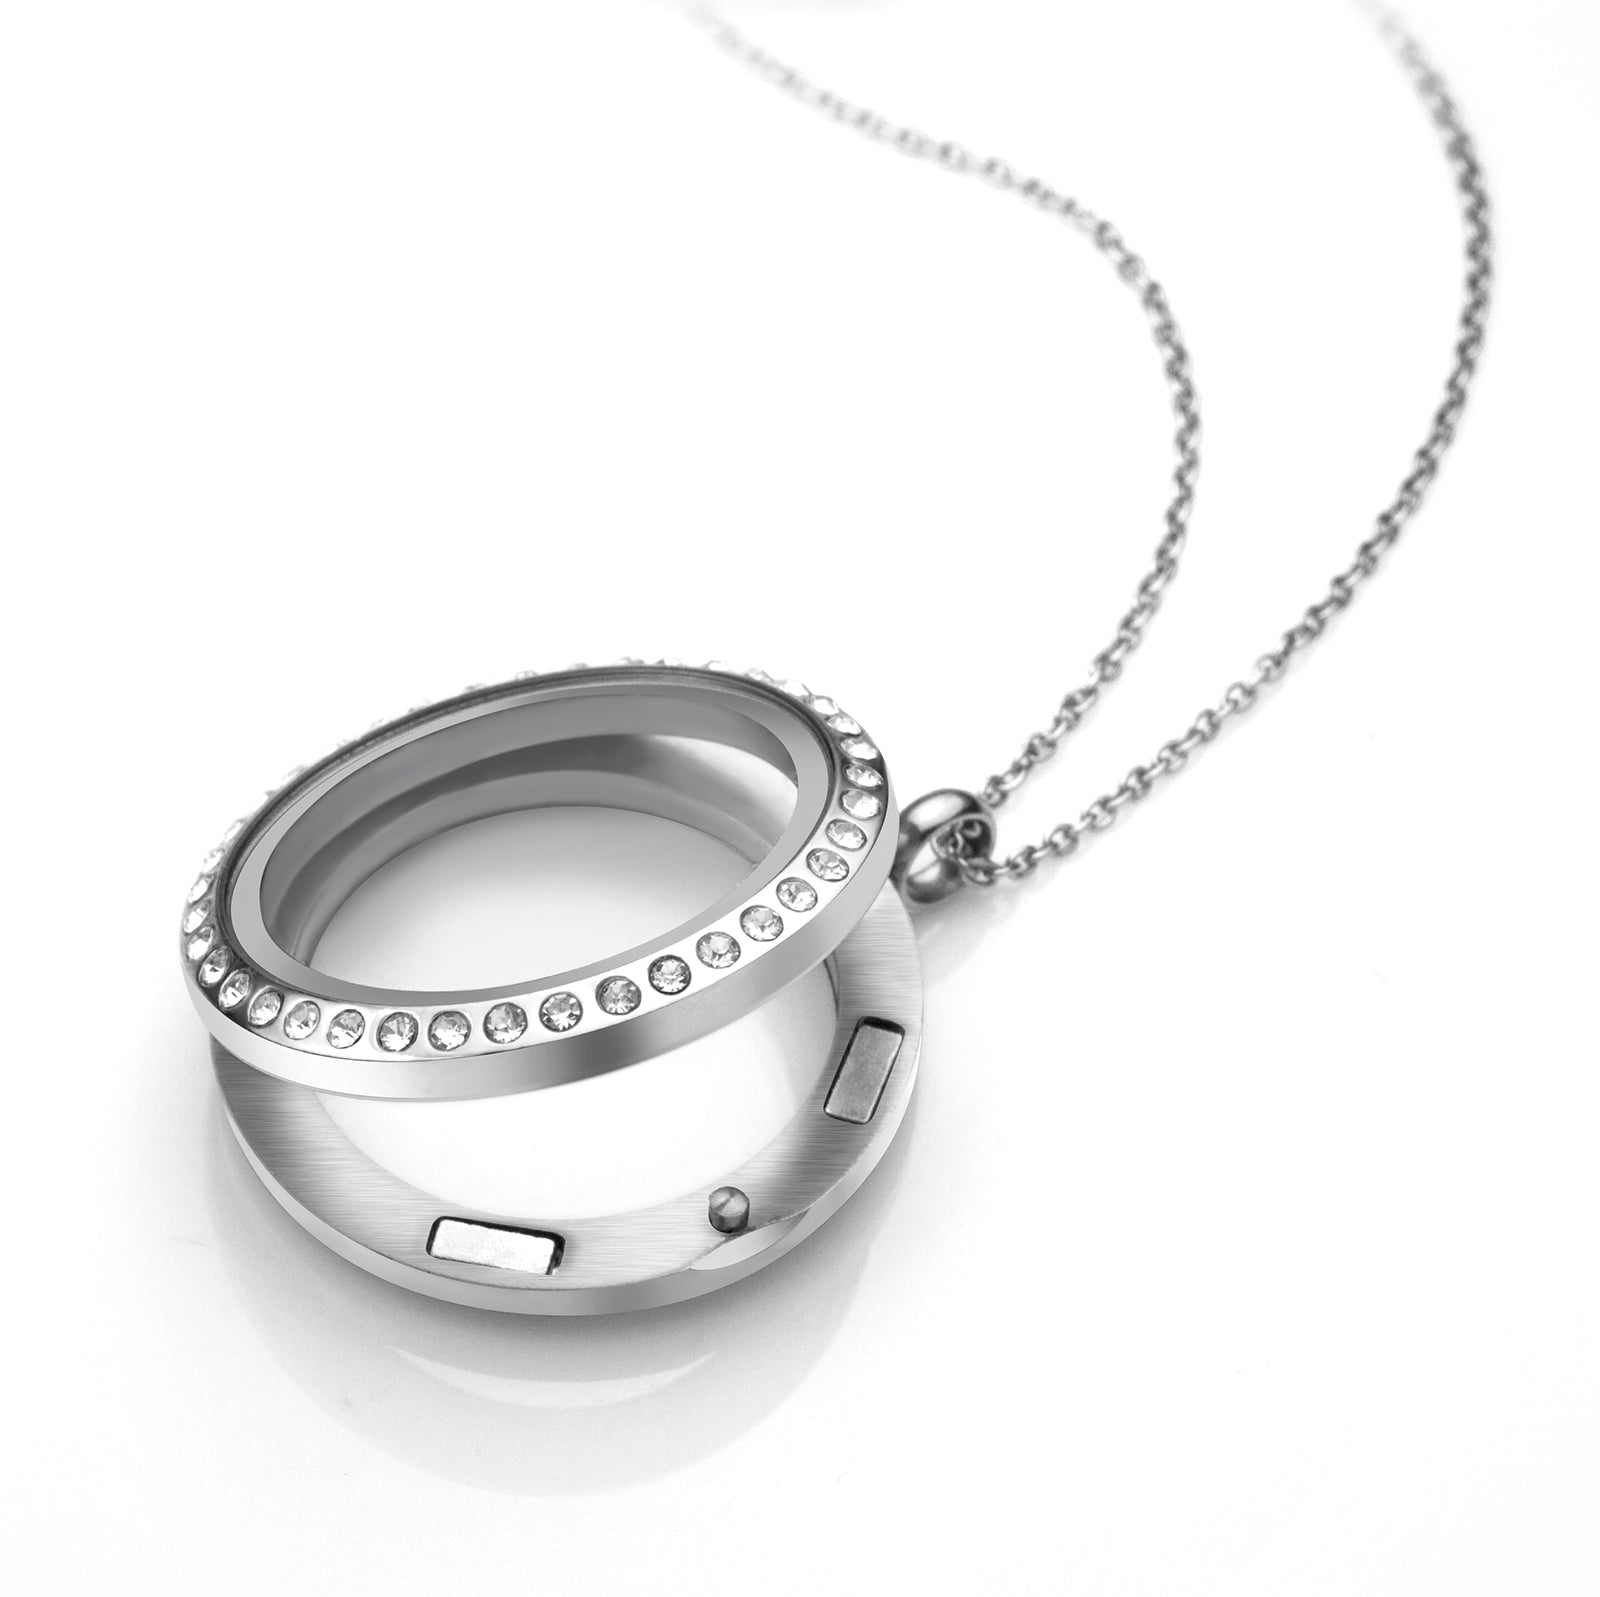 MNC-P778-A-25mm Stainless Steel Clear Locket